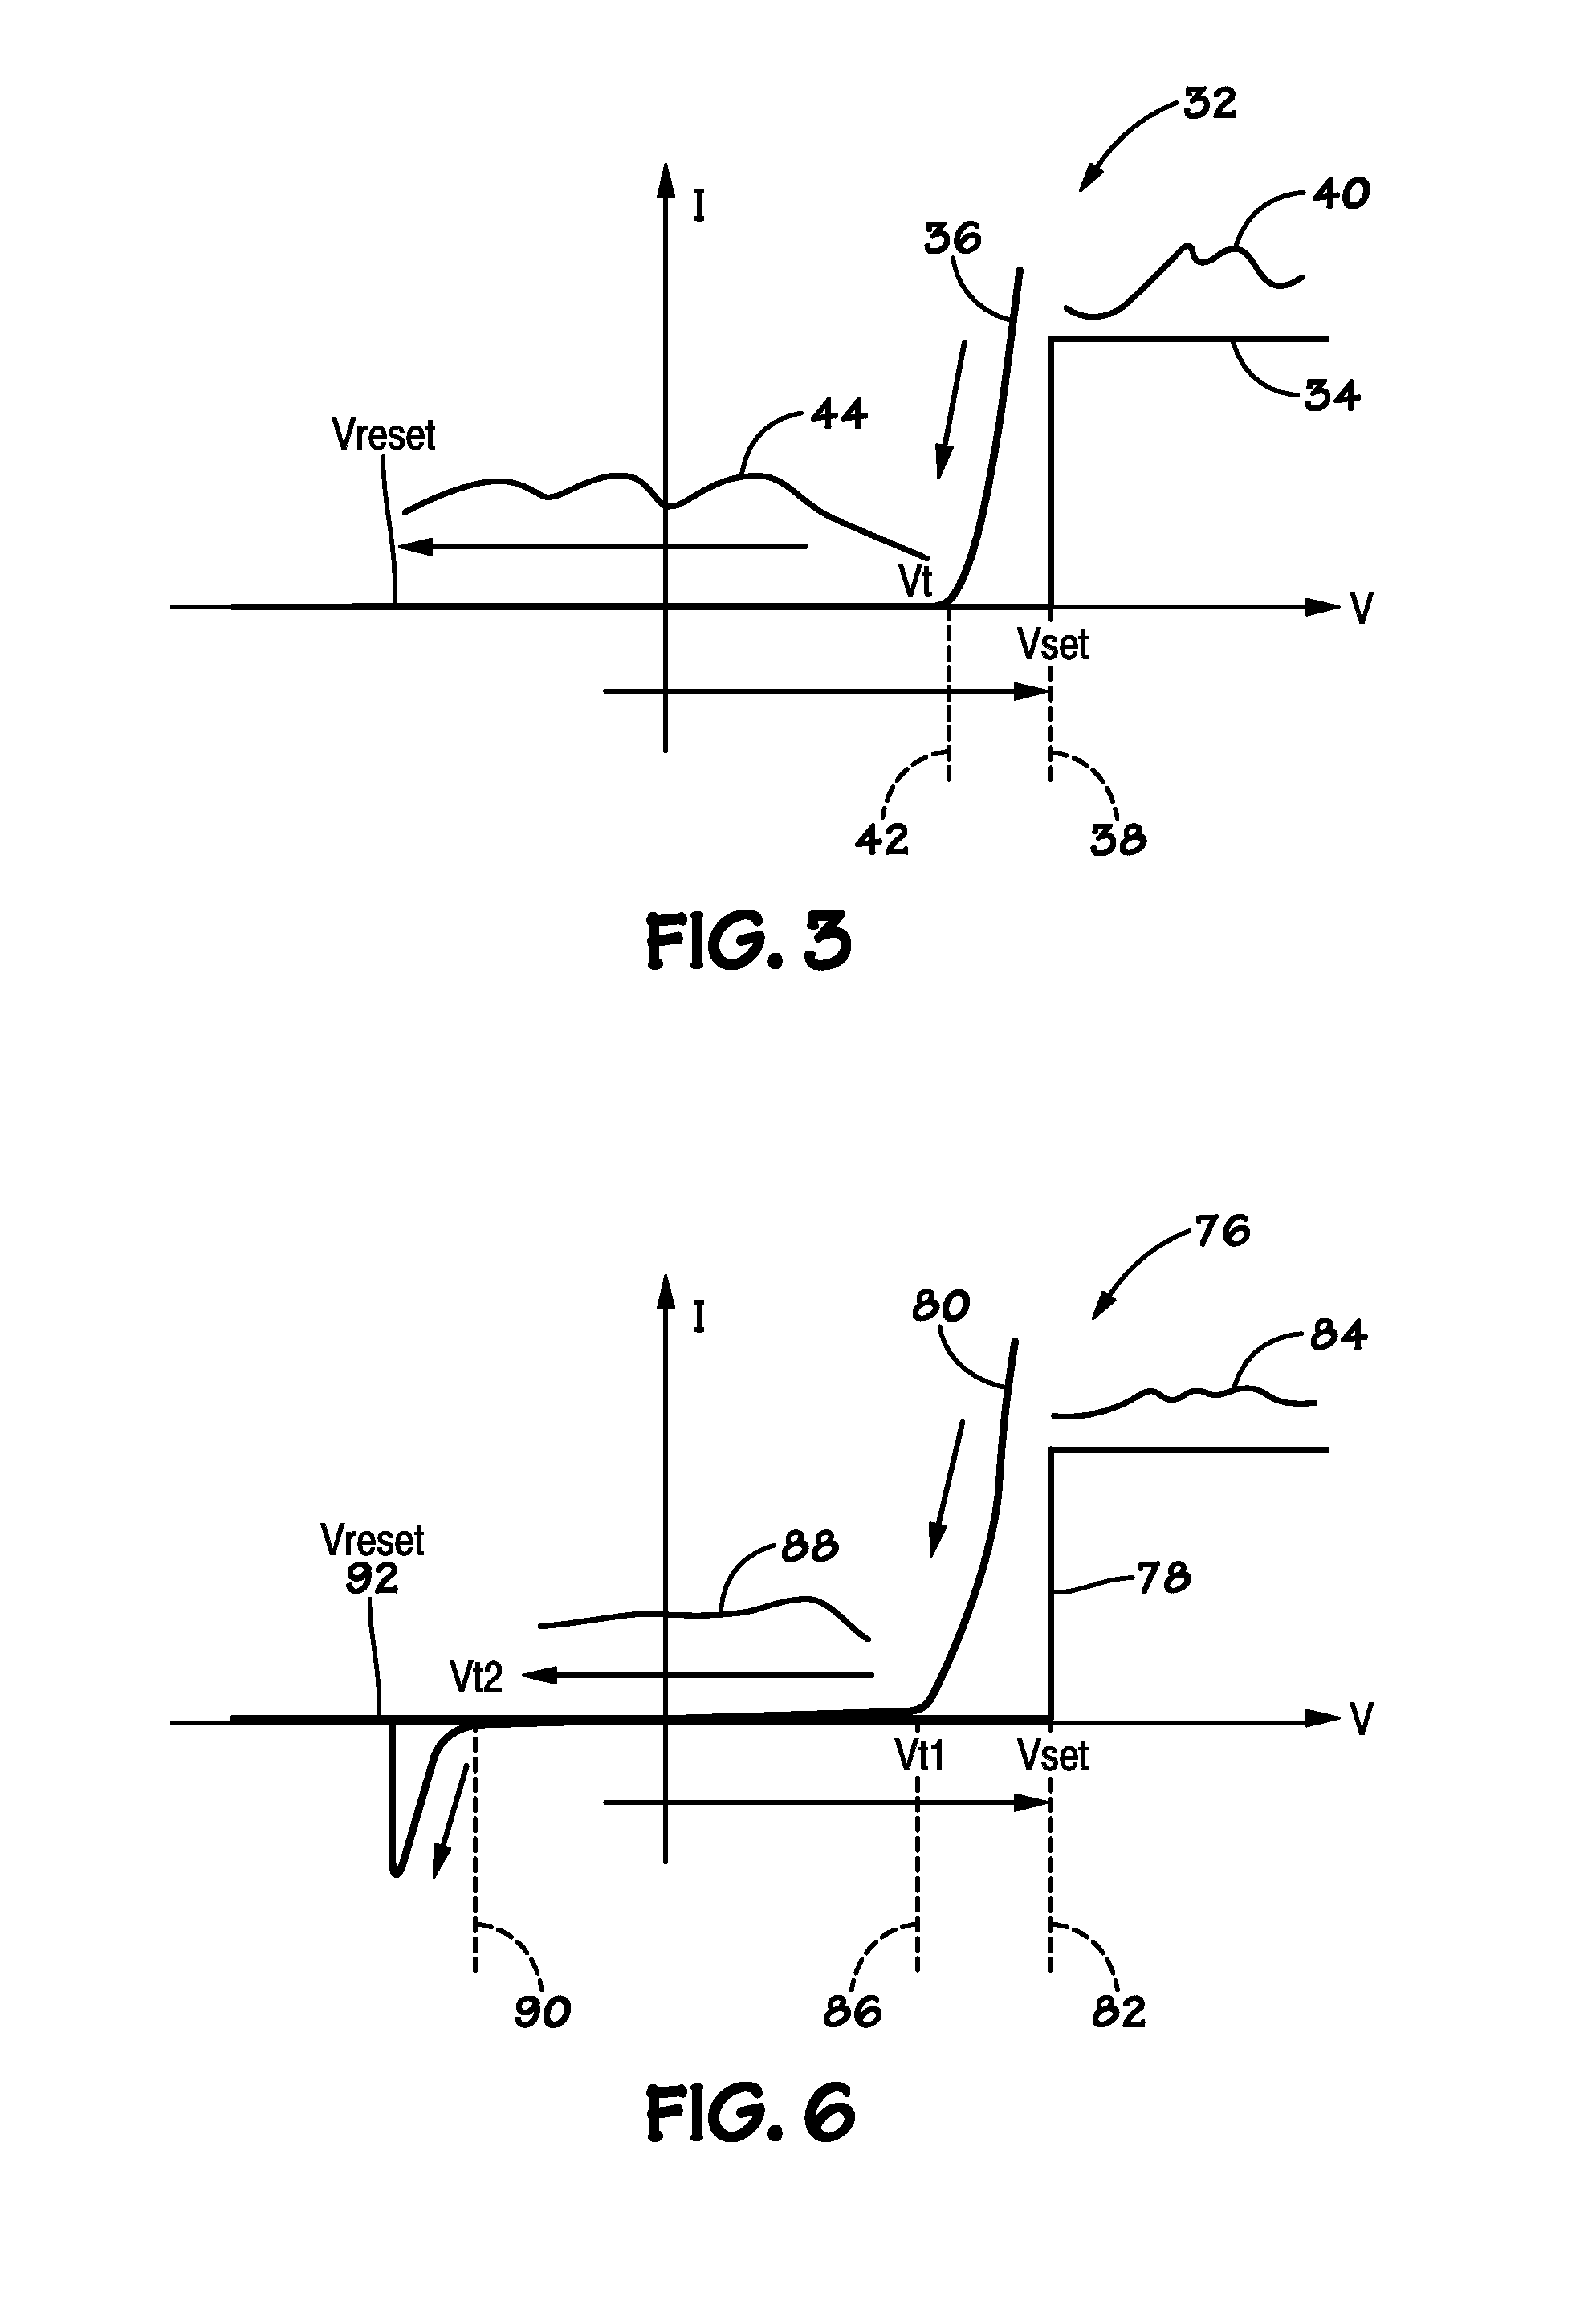 Bipolar Switching Memory Cell With Built-in "On" State Rectifying Current-Voltage Characteristics